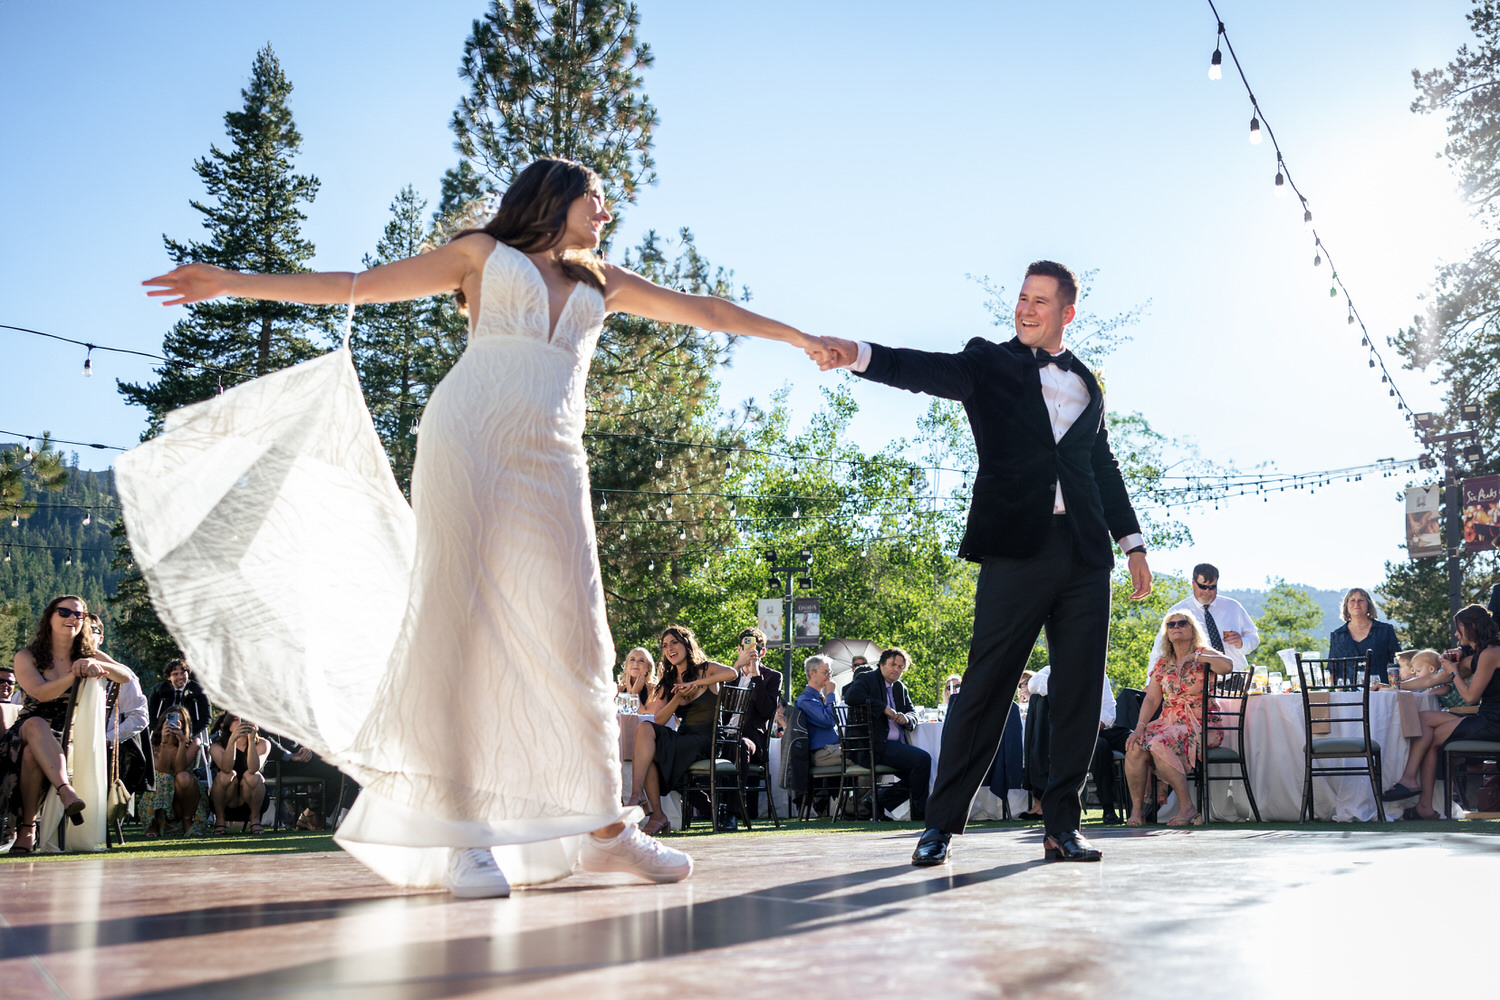 A choreographed wedding dance on an outdoor dance floor at The Pavilion reception area.